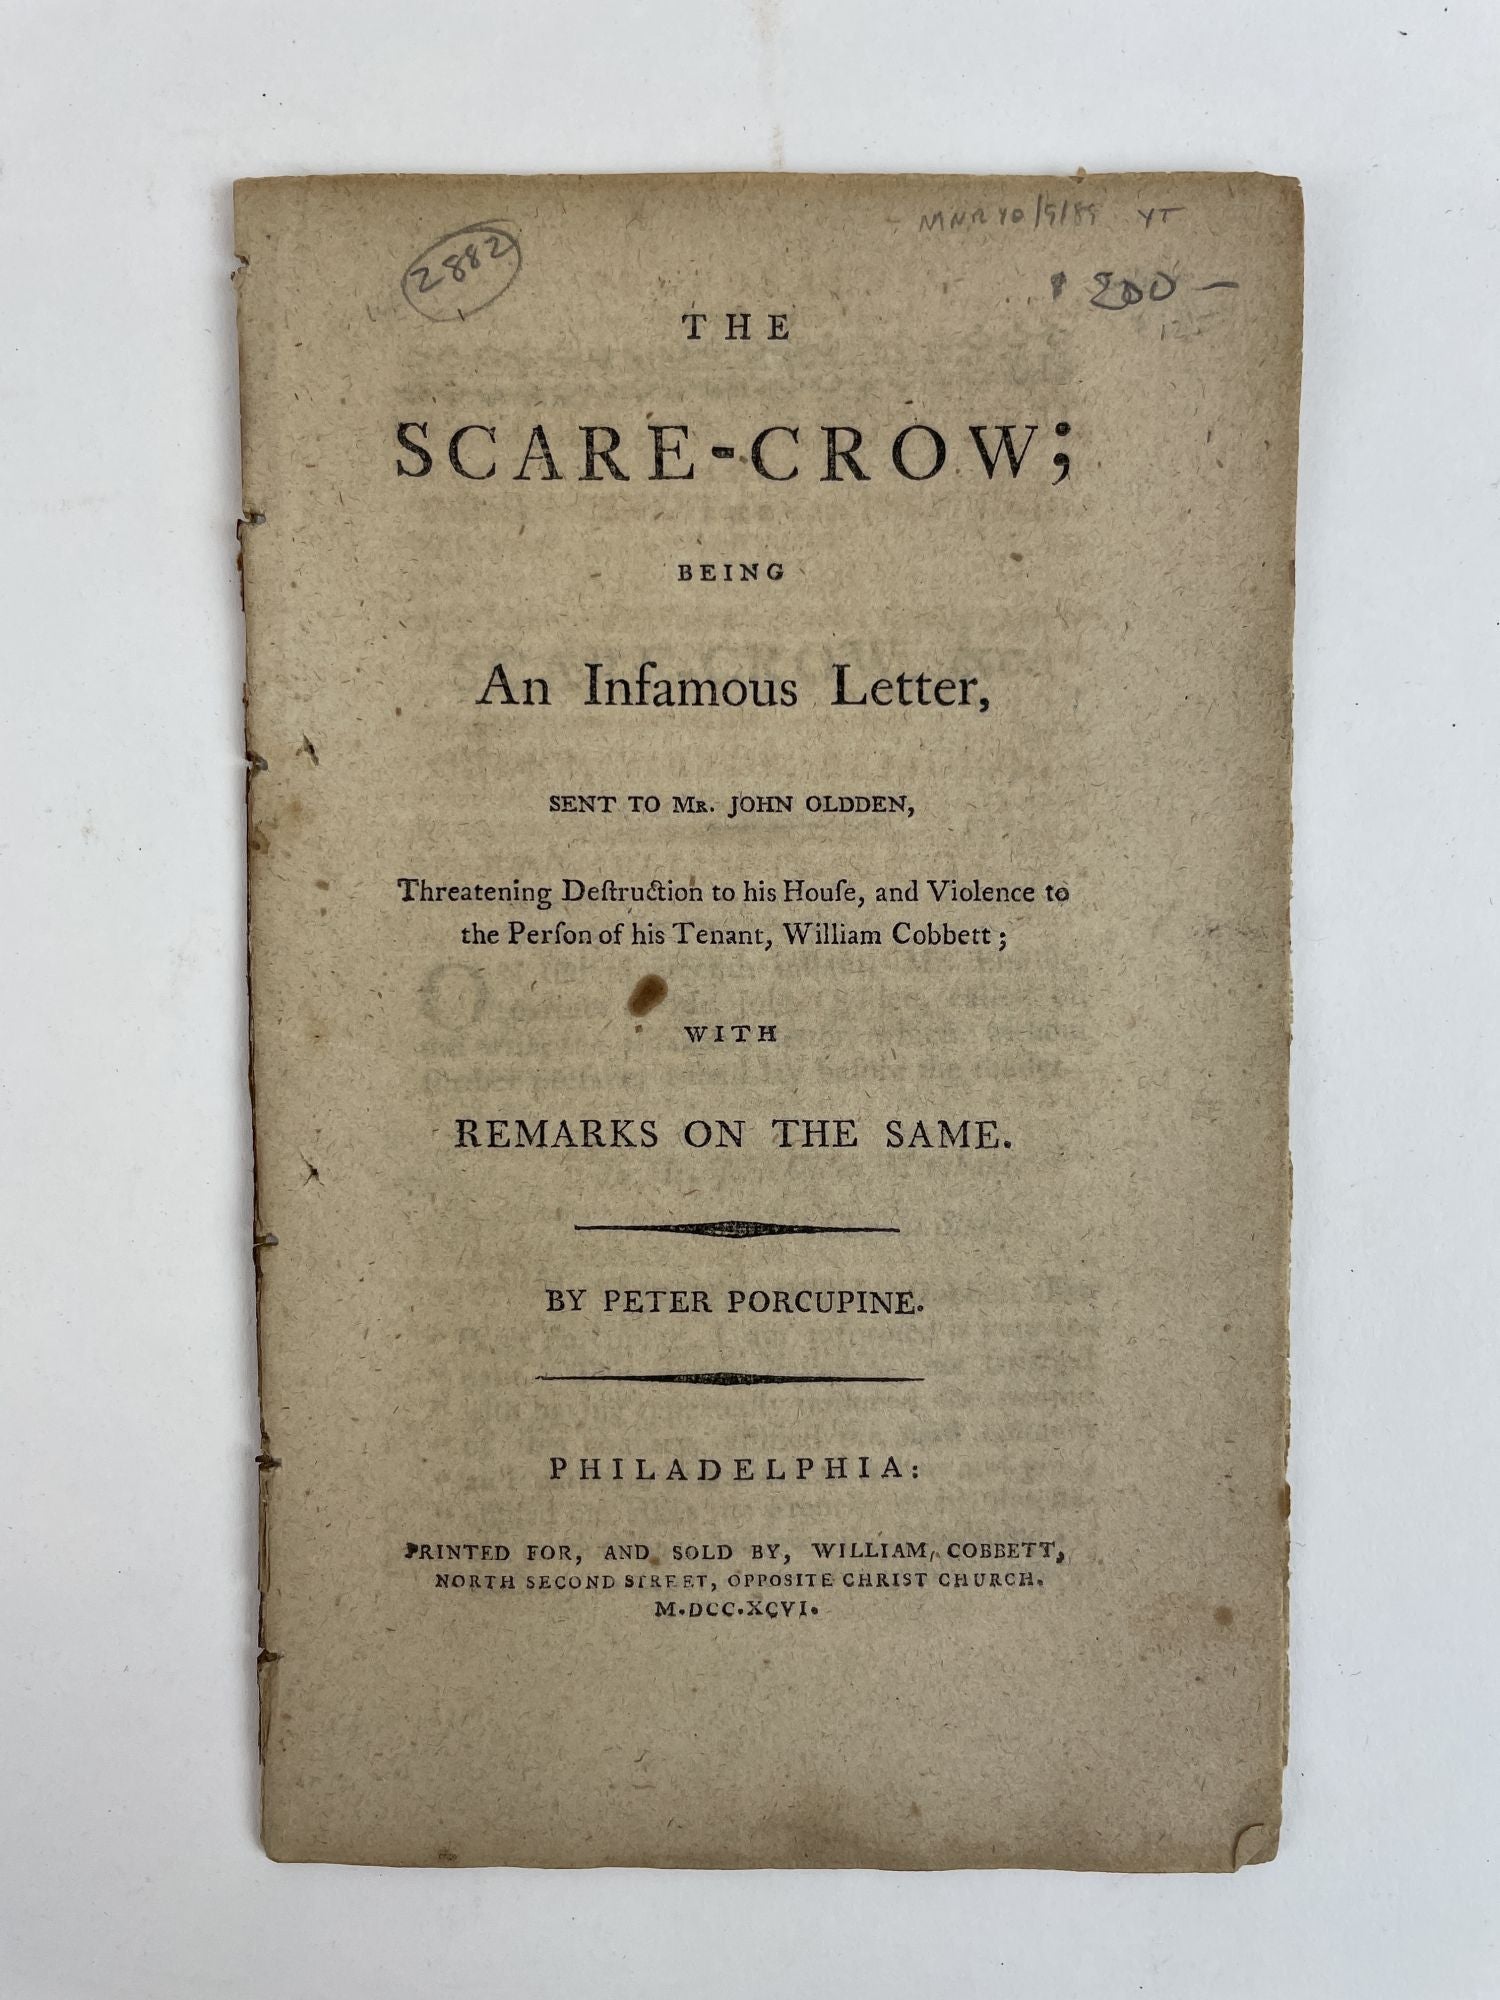 Product Image for WILLIAM COBBETT: ANS AND PAMPHLET COLLECTION